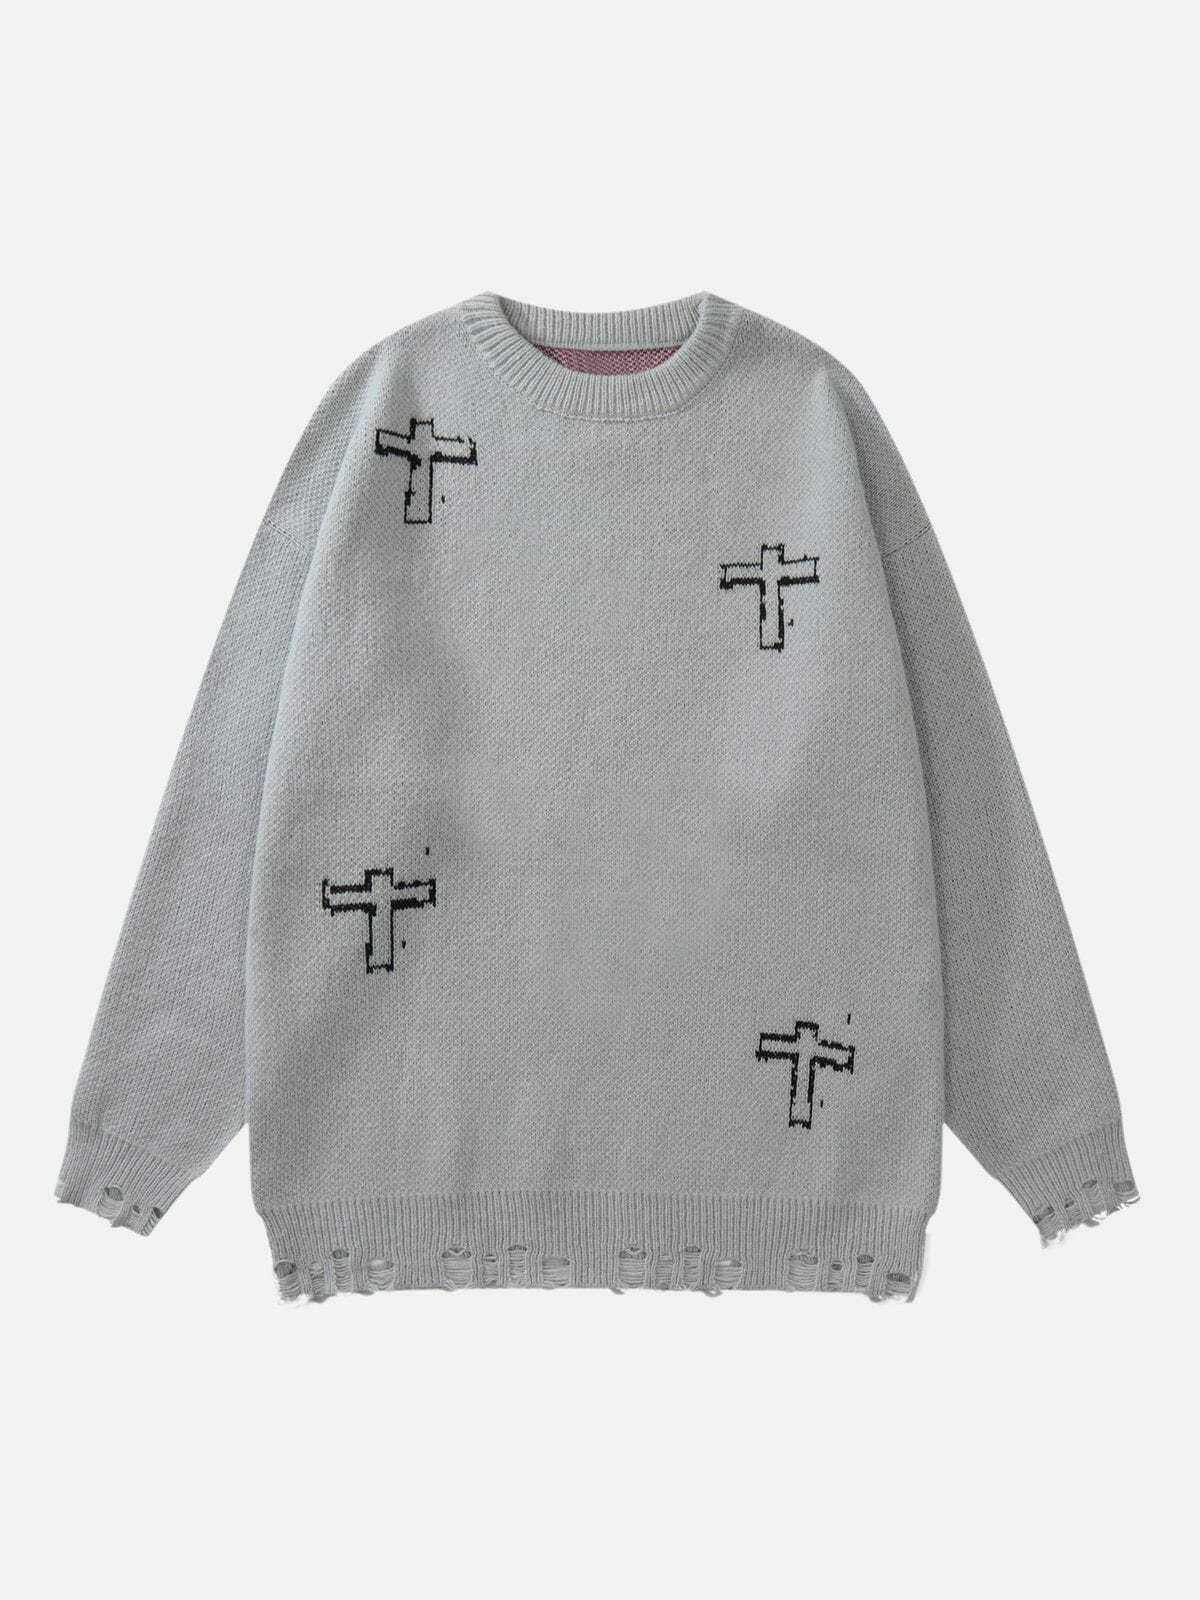 graphic cross & lie' sweater edgy streetwear essential 8942